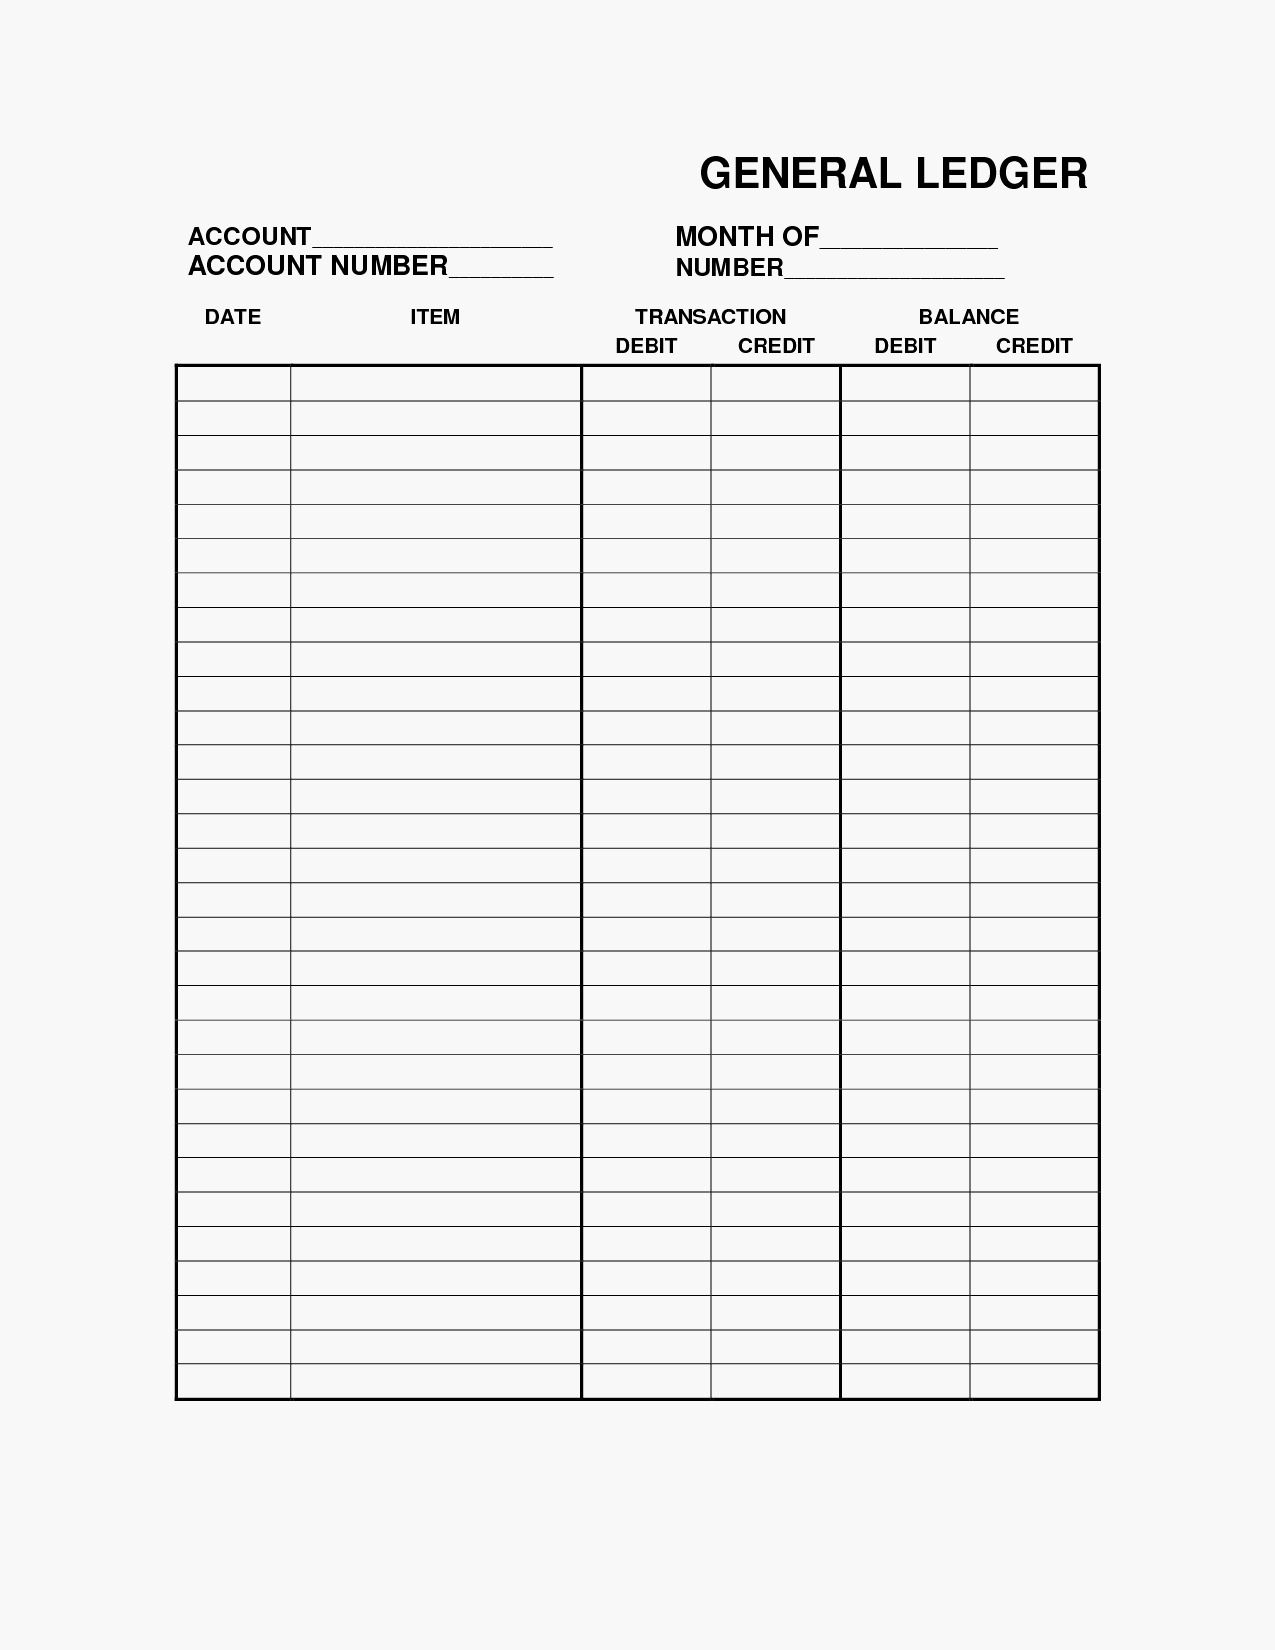 receipt-tracking-spreadsheet-throughout-expense-tracker-excel-template-glendale-community